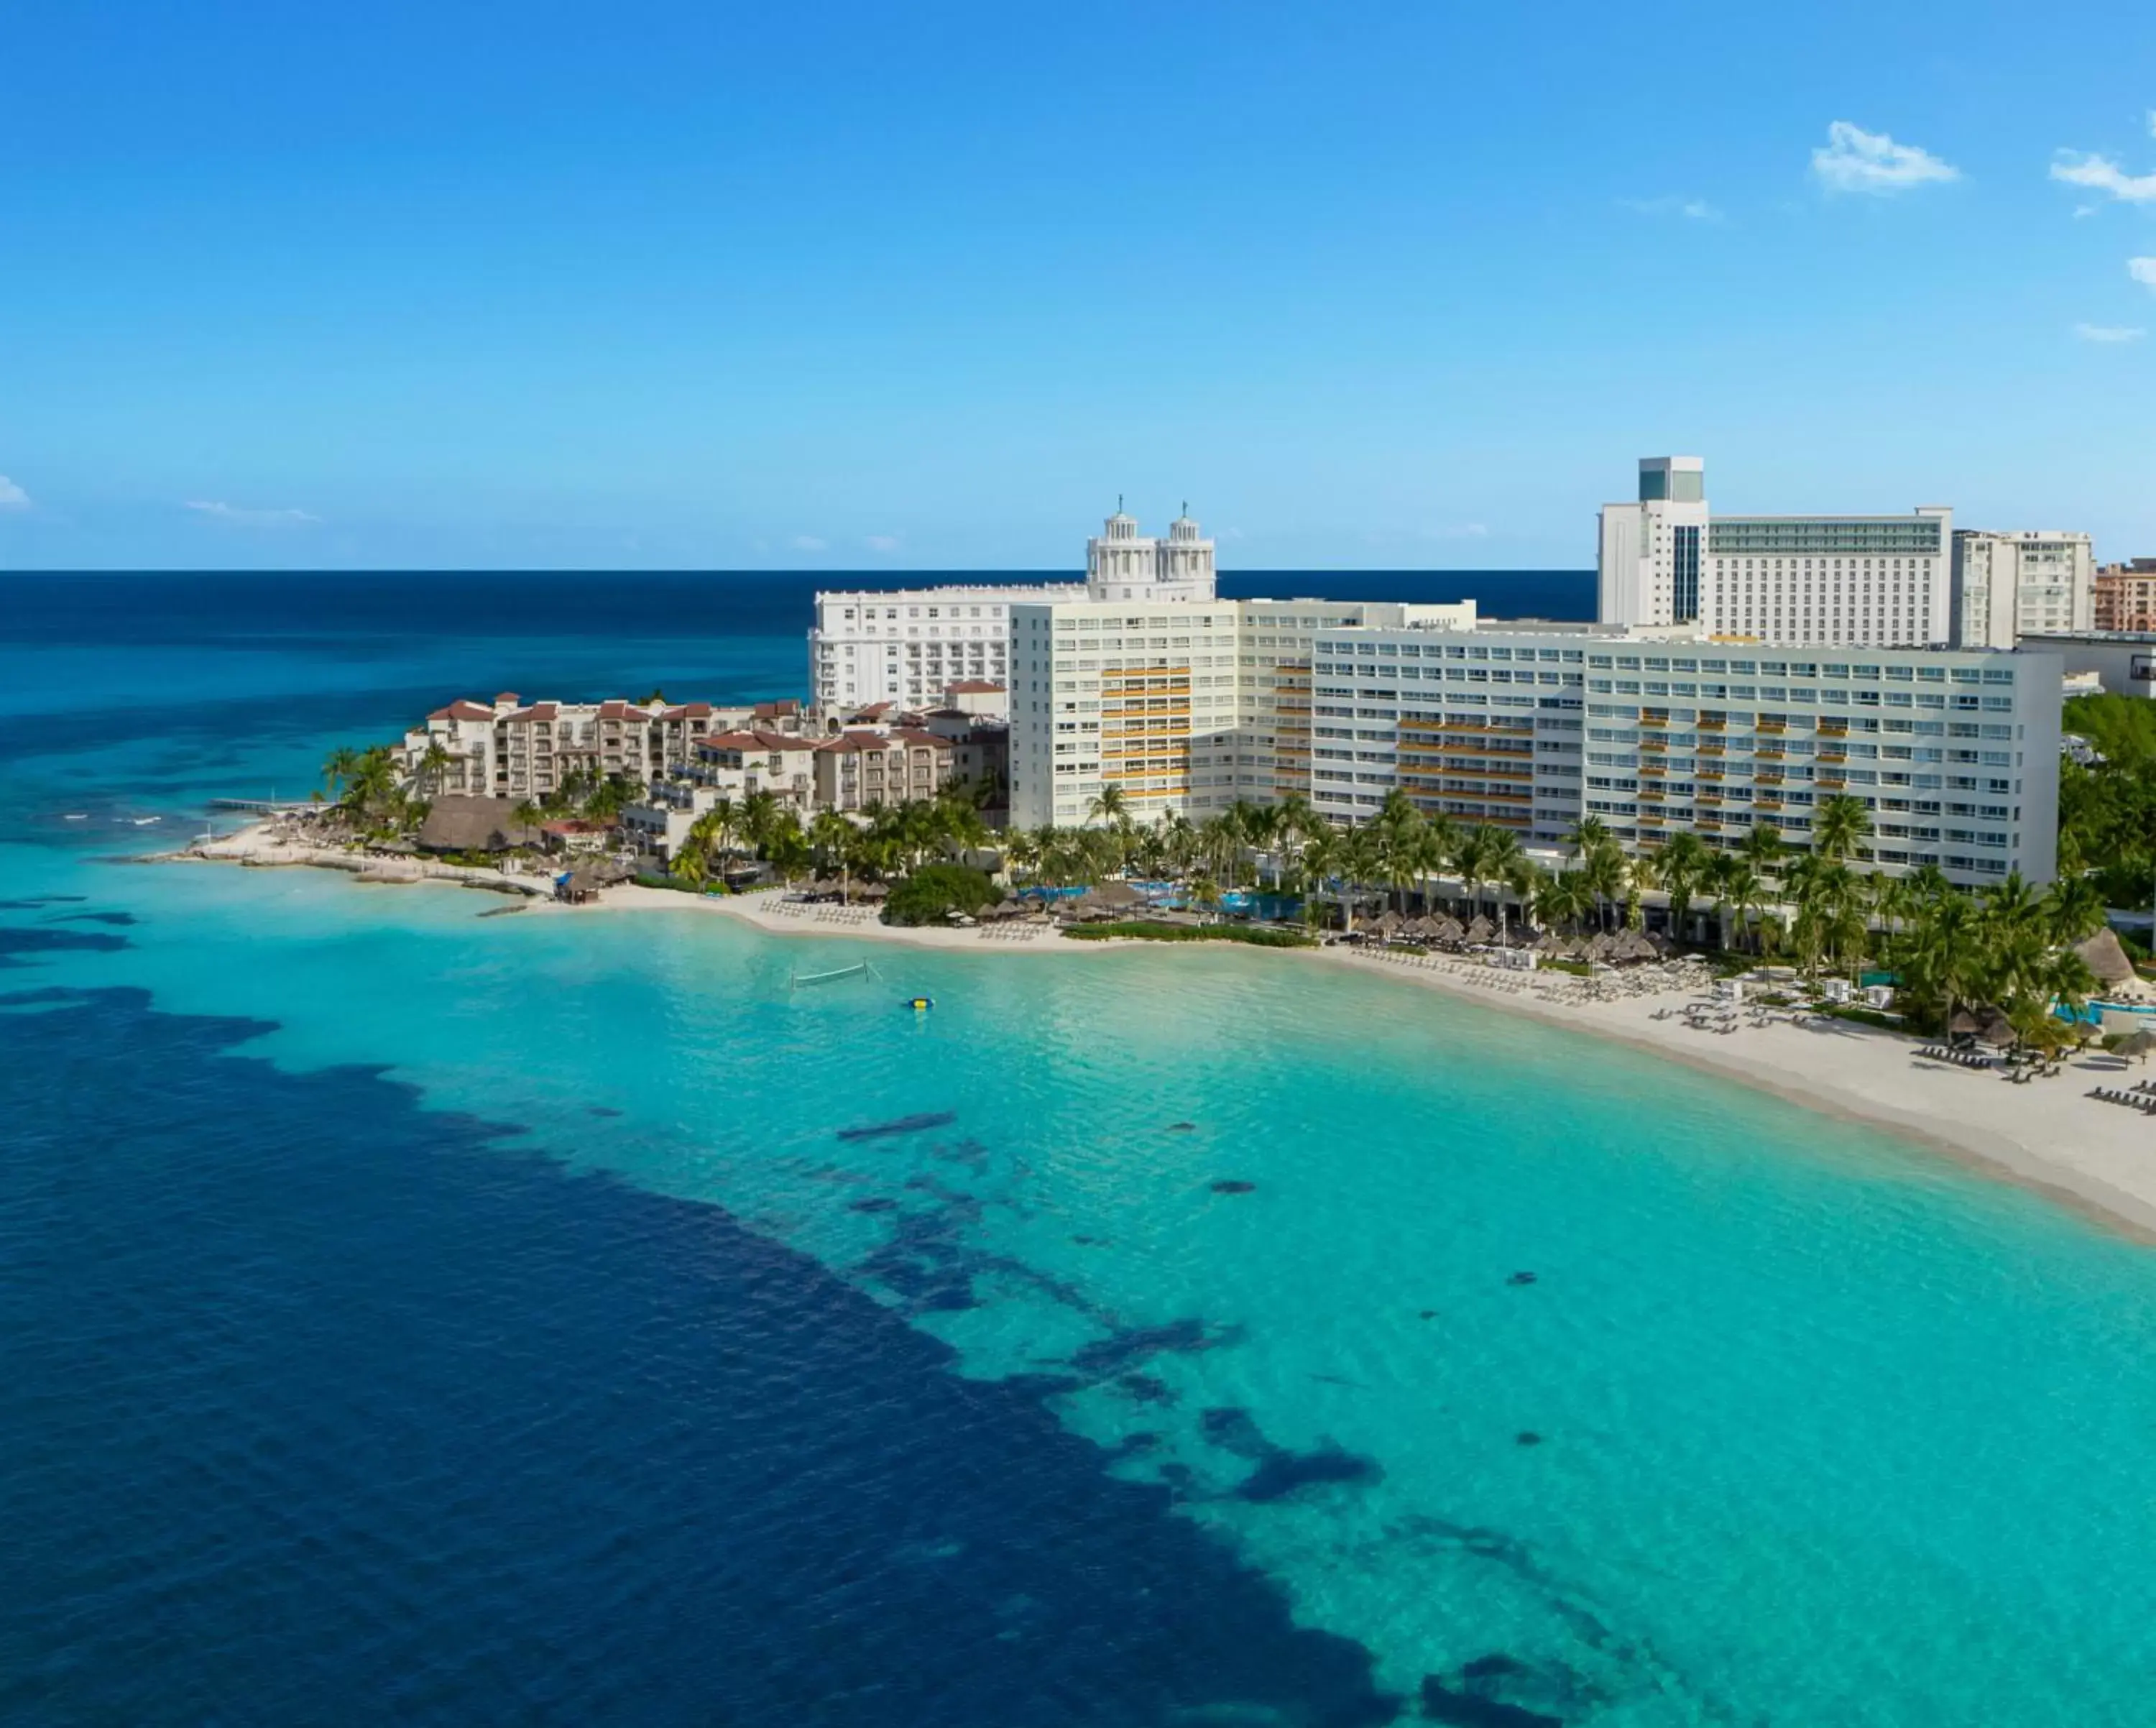 Property building, Bird's-eye View in Dreams Sands Cancun Resort & Spa